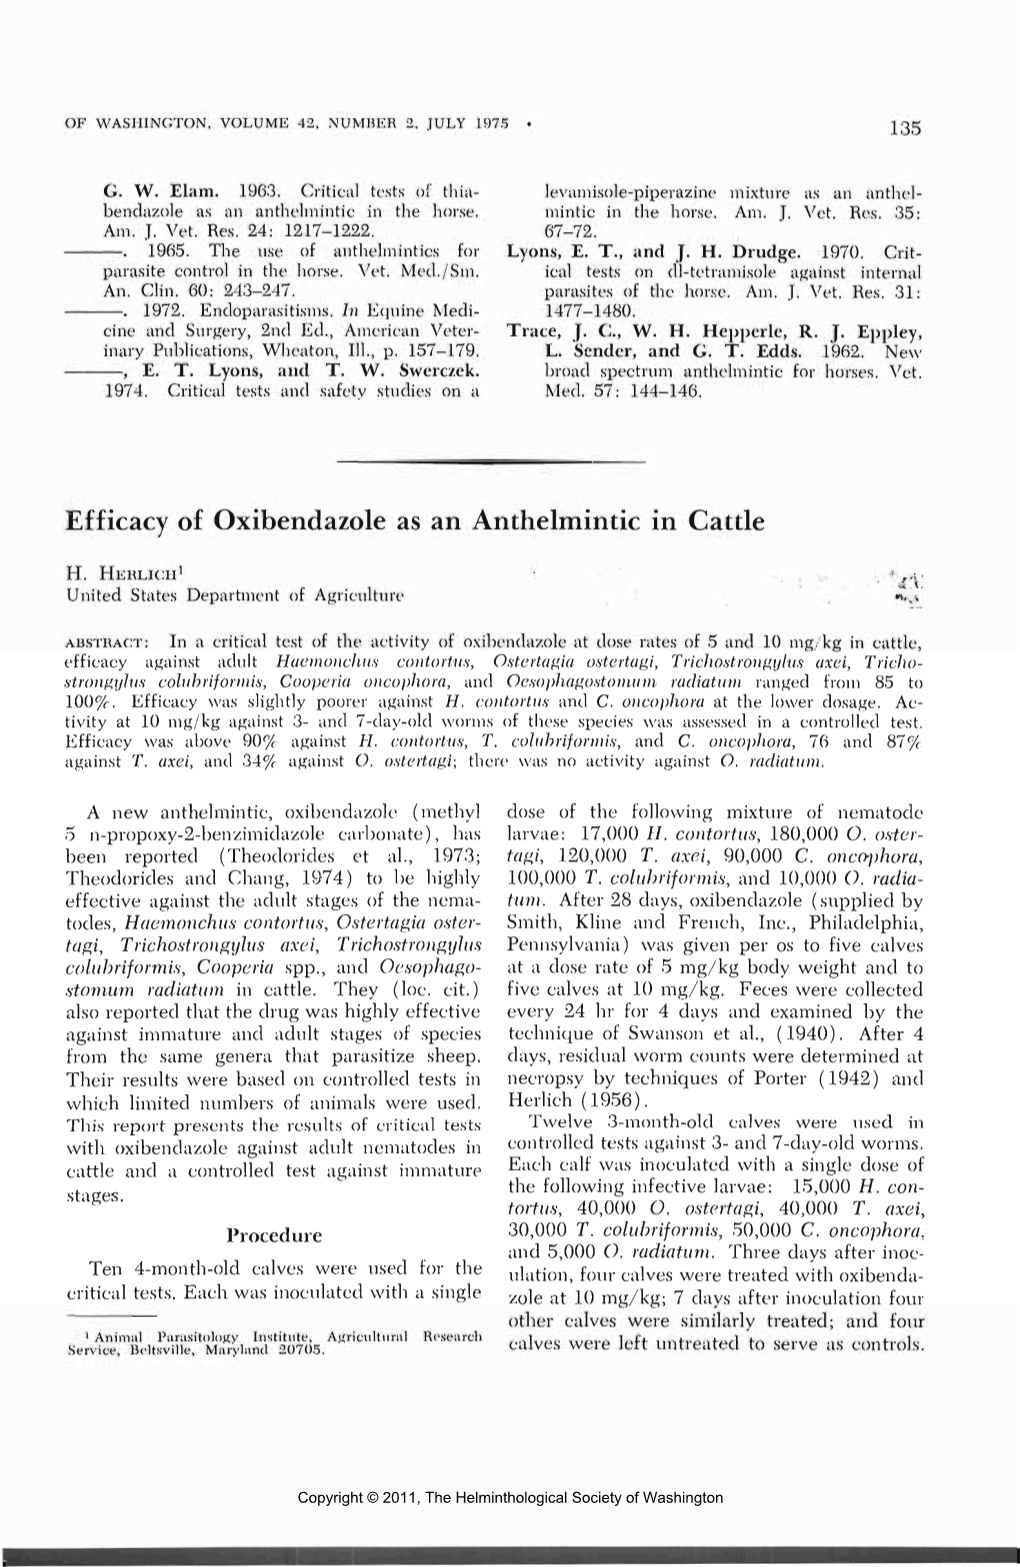 Efficacy of Oxibendazole As an Anthelmintic in Cattle